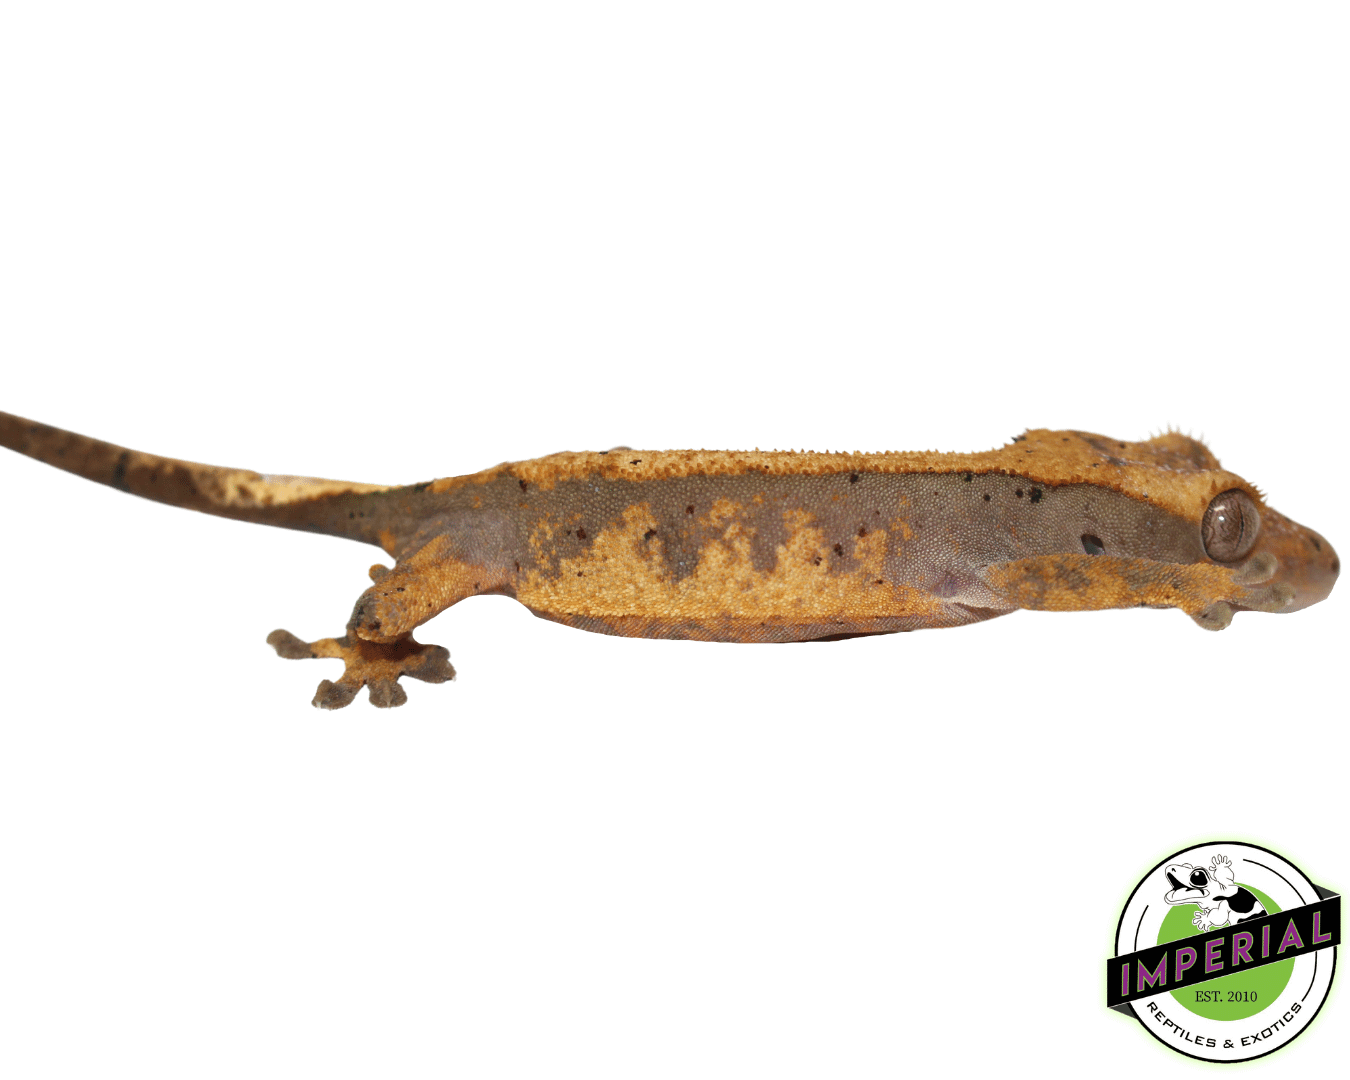 crested gecko for sale, buy reptiles online